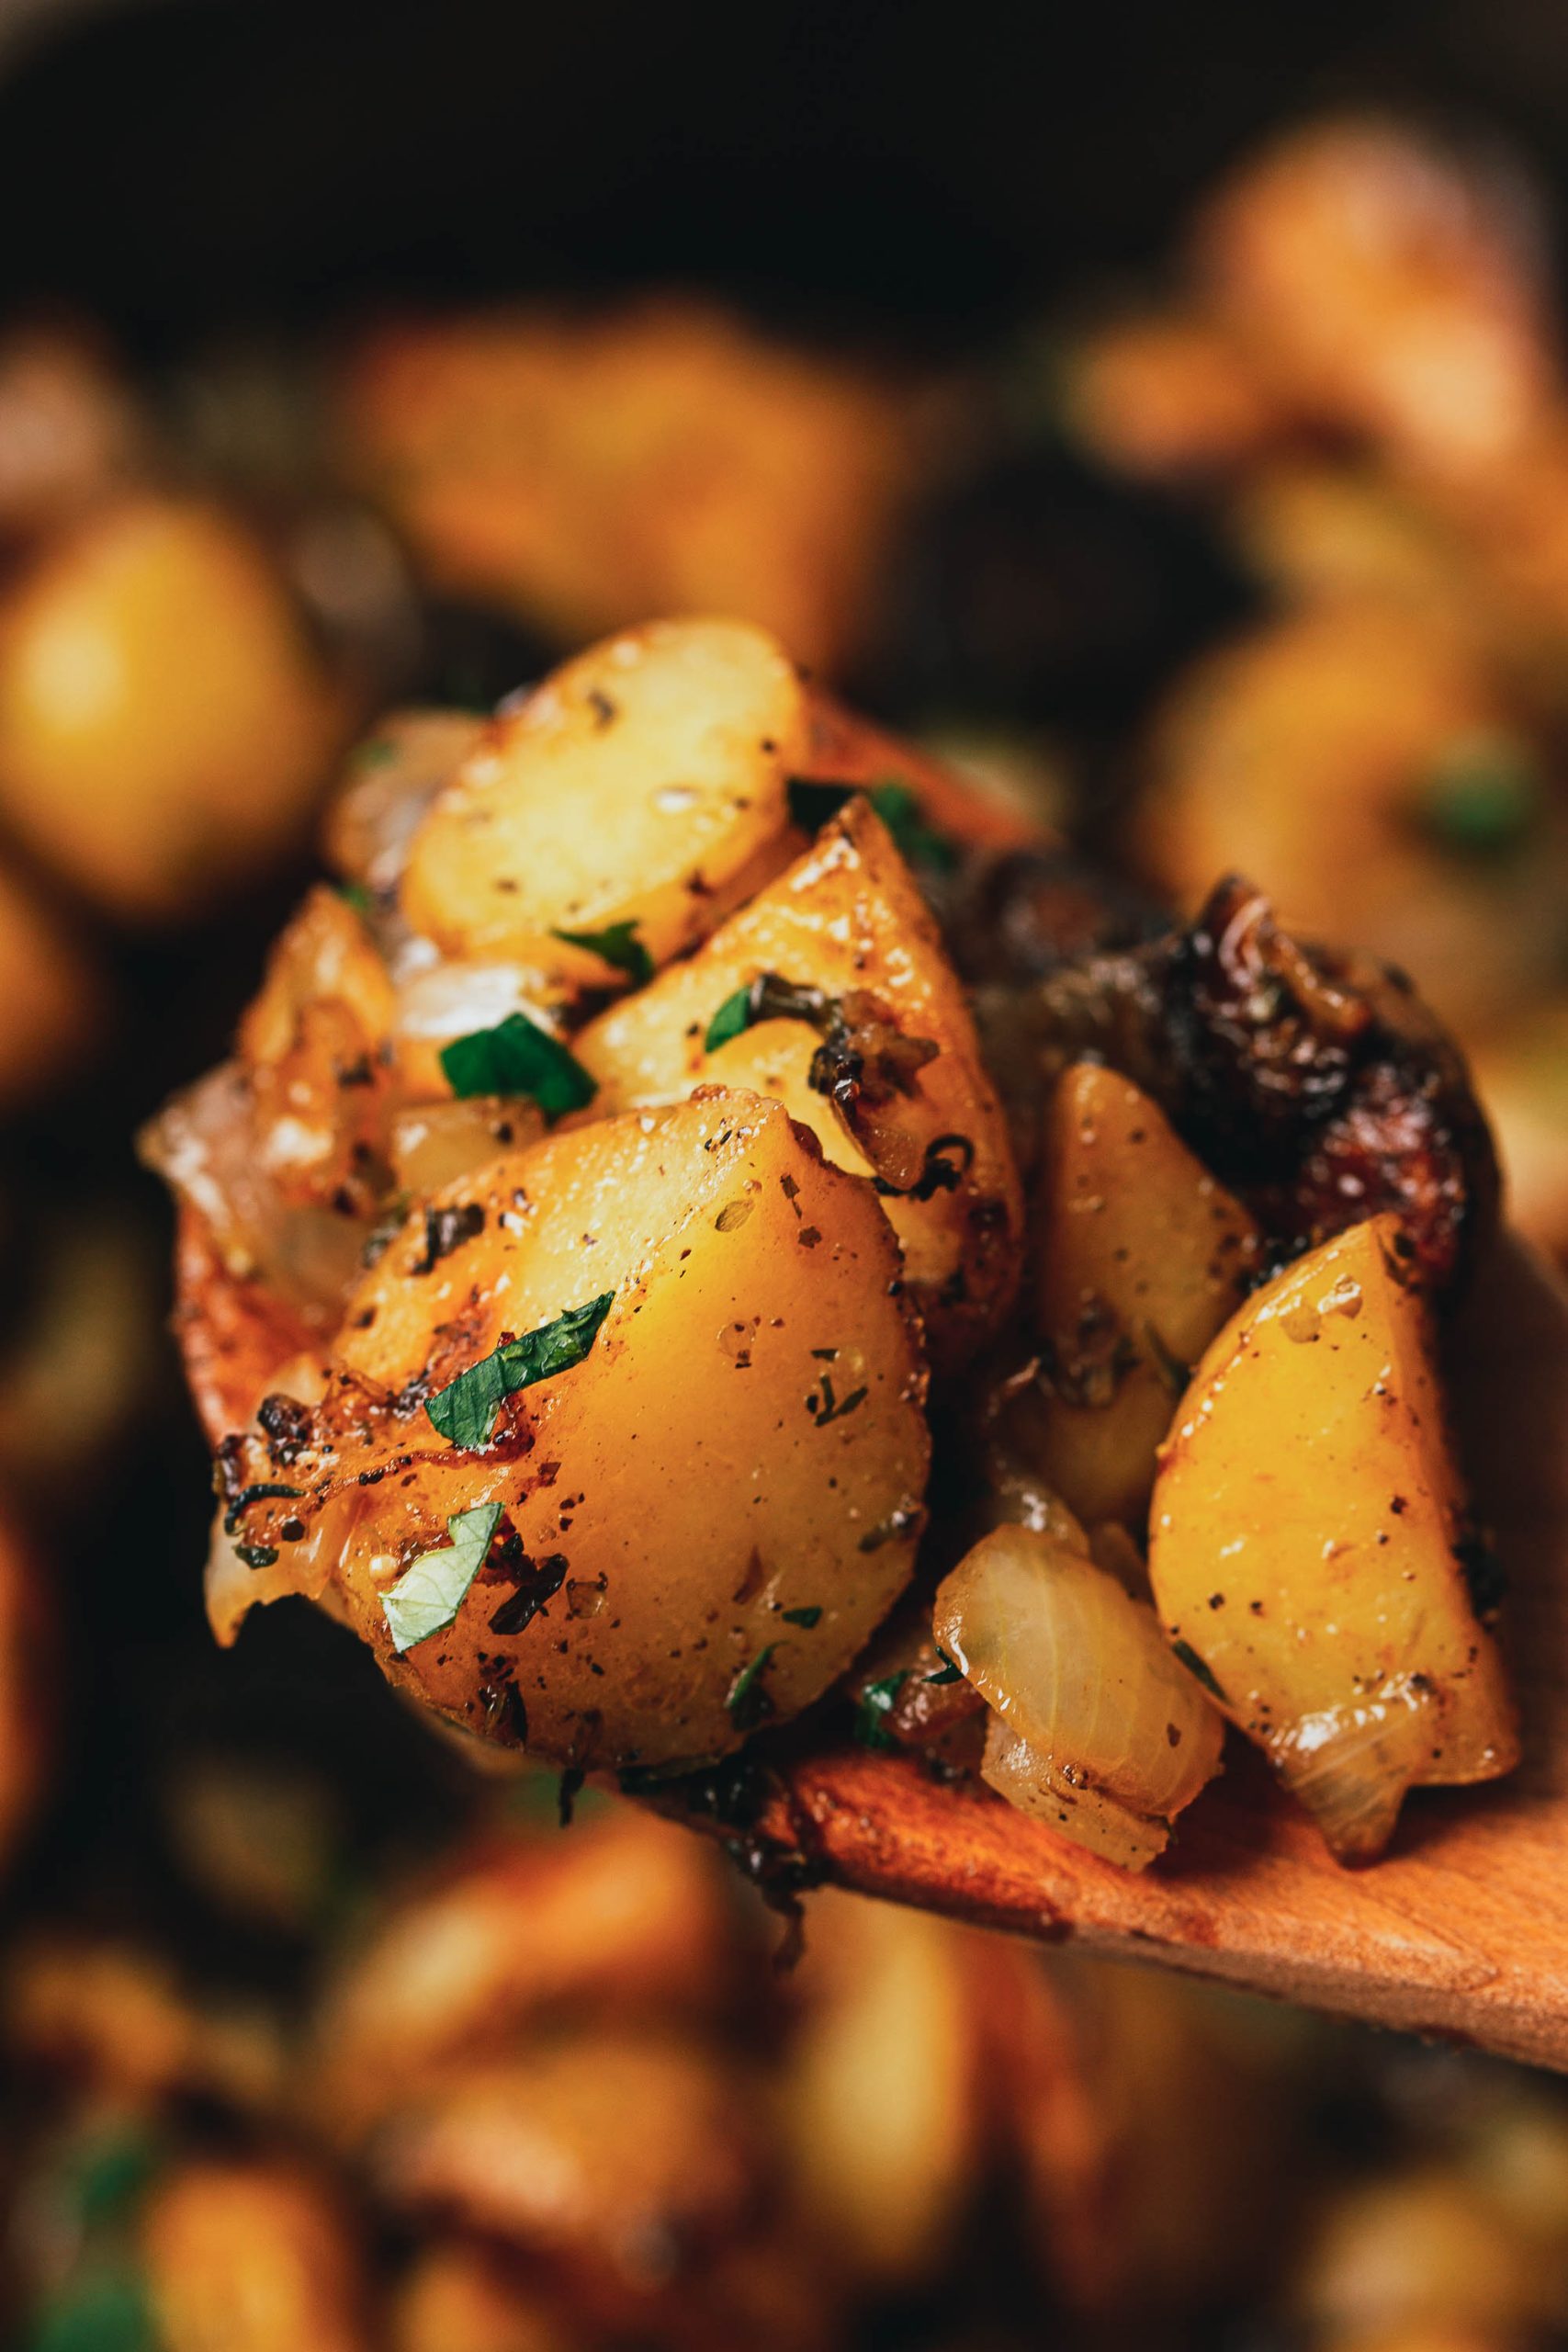 Close-up of roasted potatoes with charred edges, garnished with chopped herbs, being scooped with a wooden spoon.